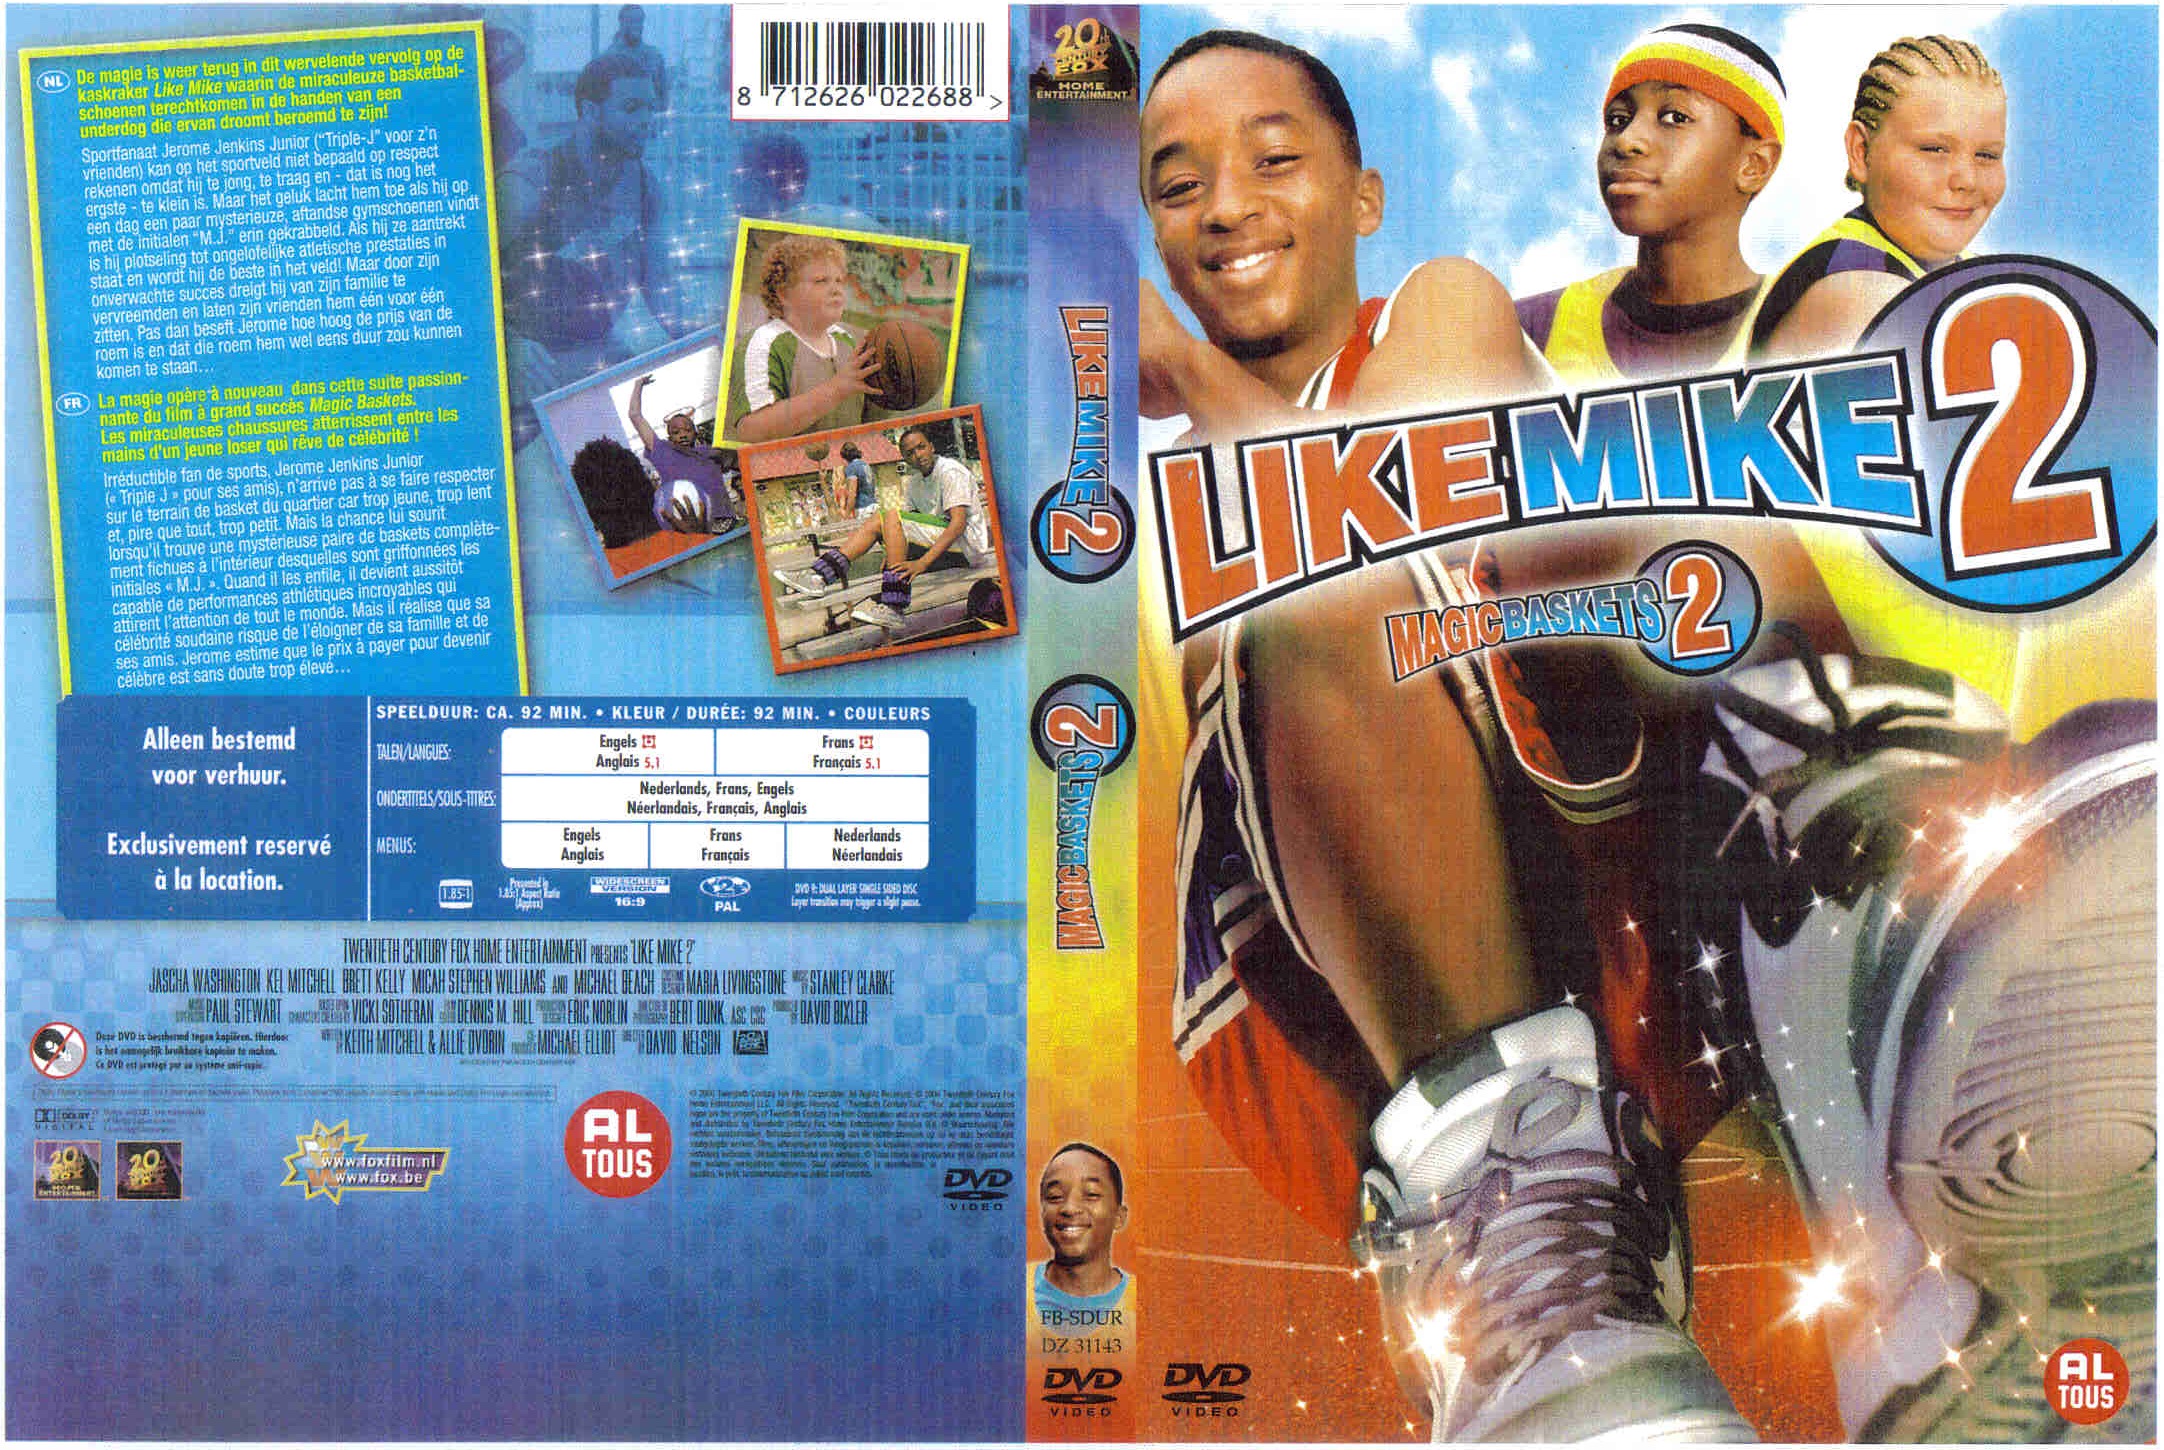 Jaquette DVD Like Mike 2